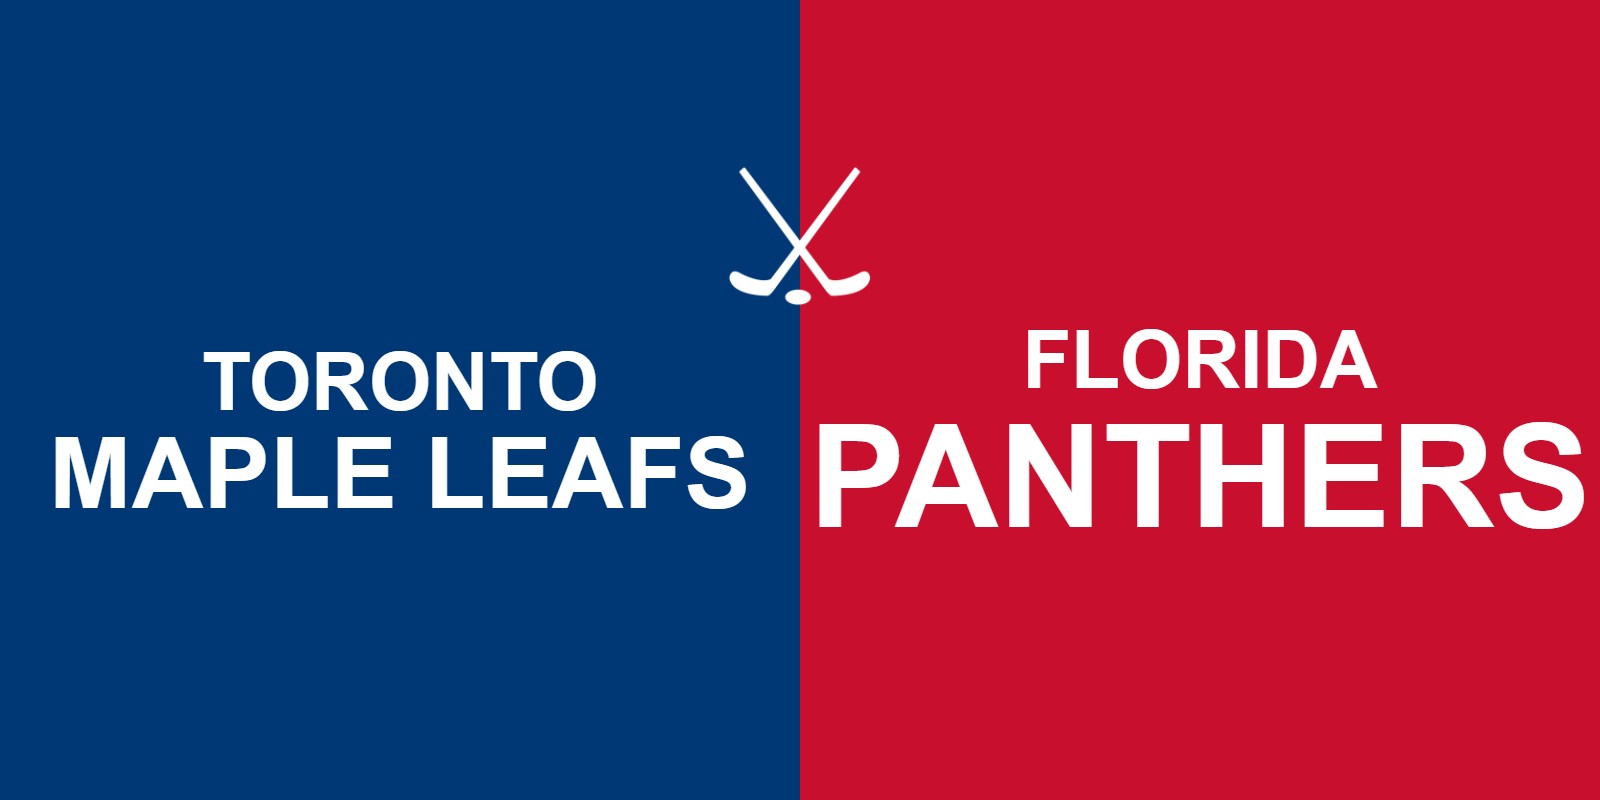 Maple Leafs vs Panthers